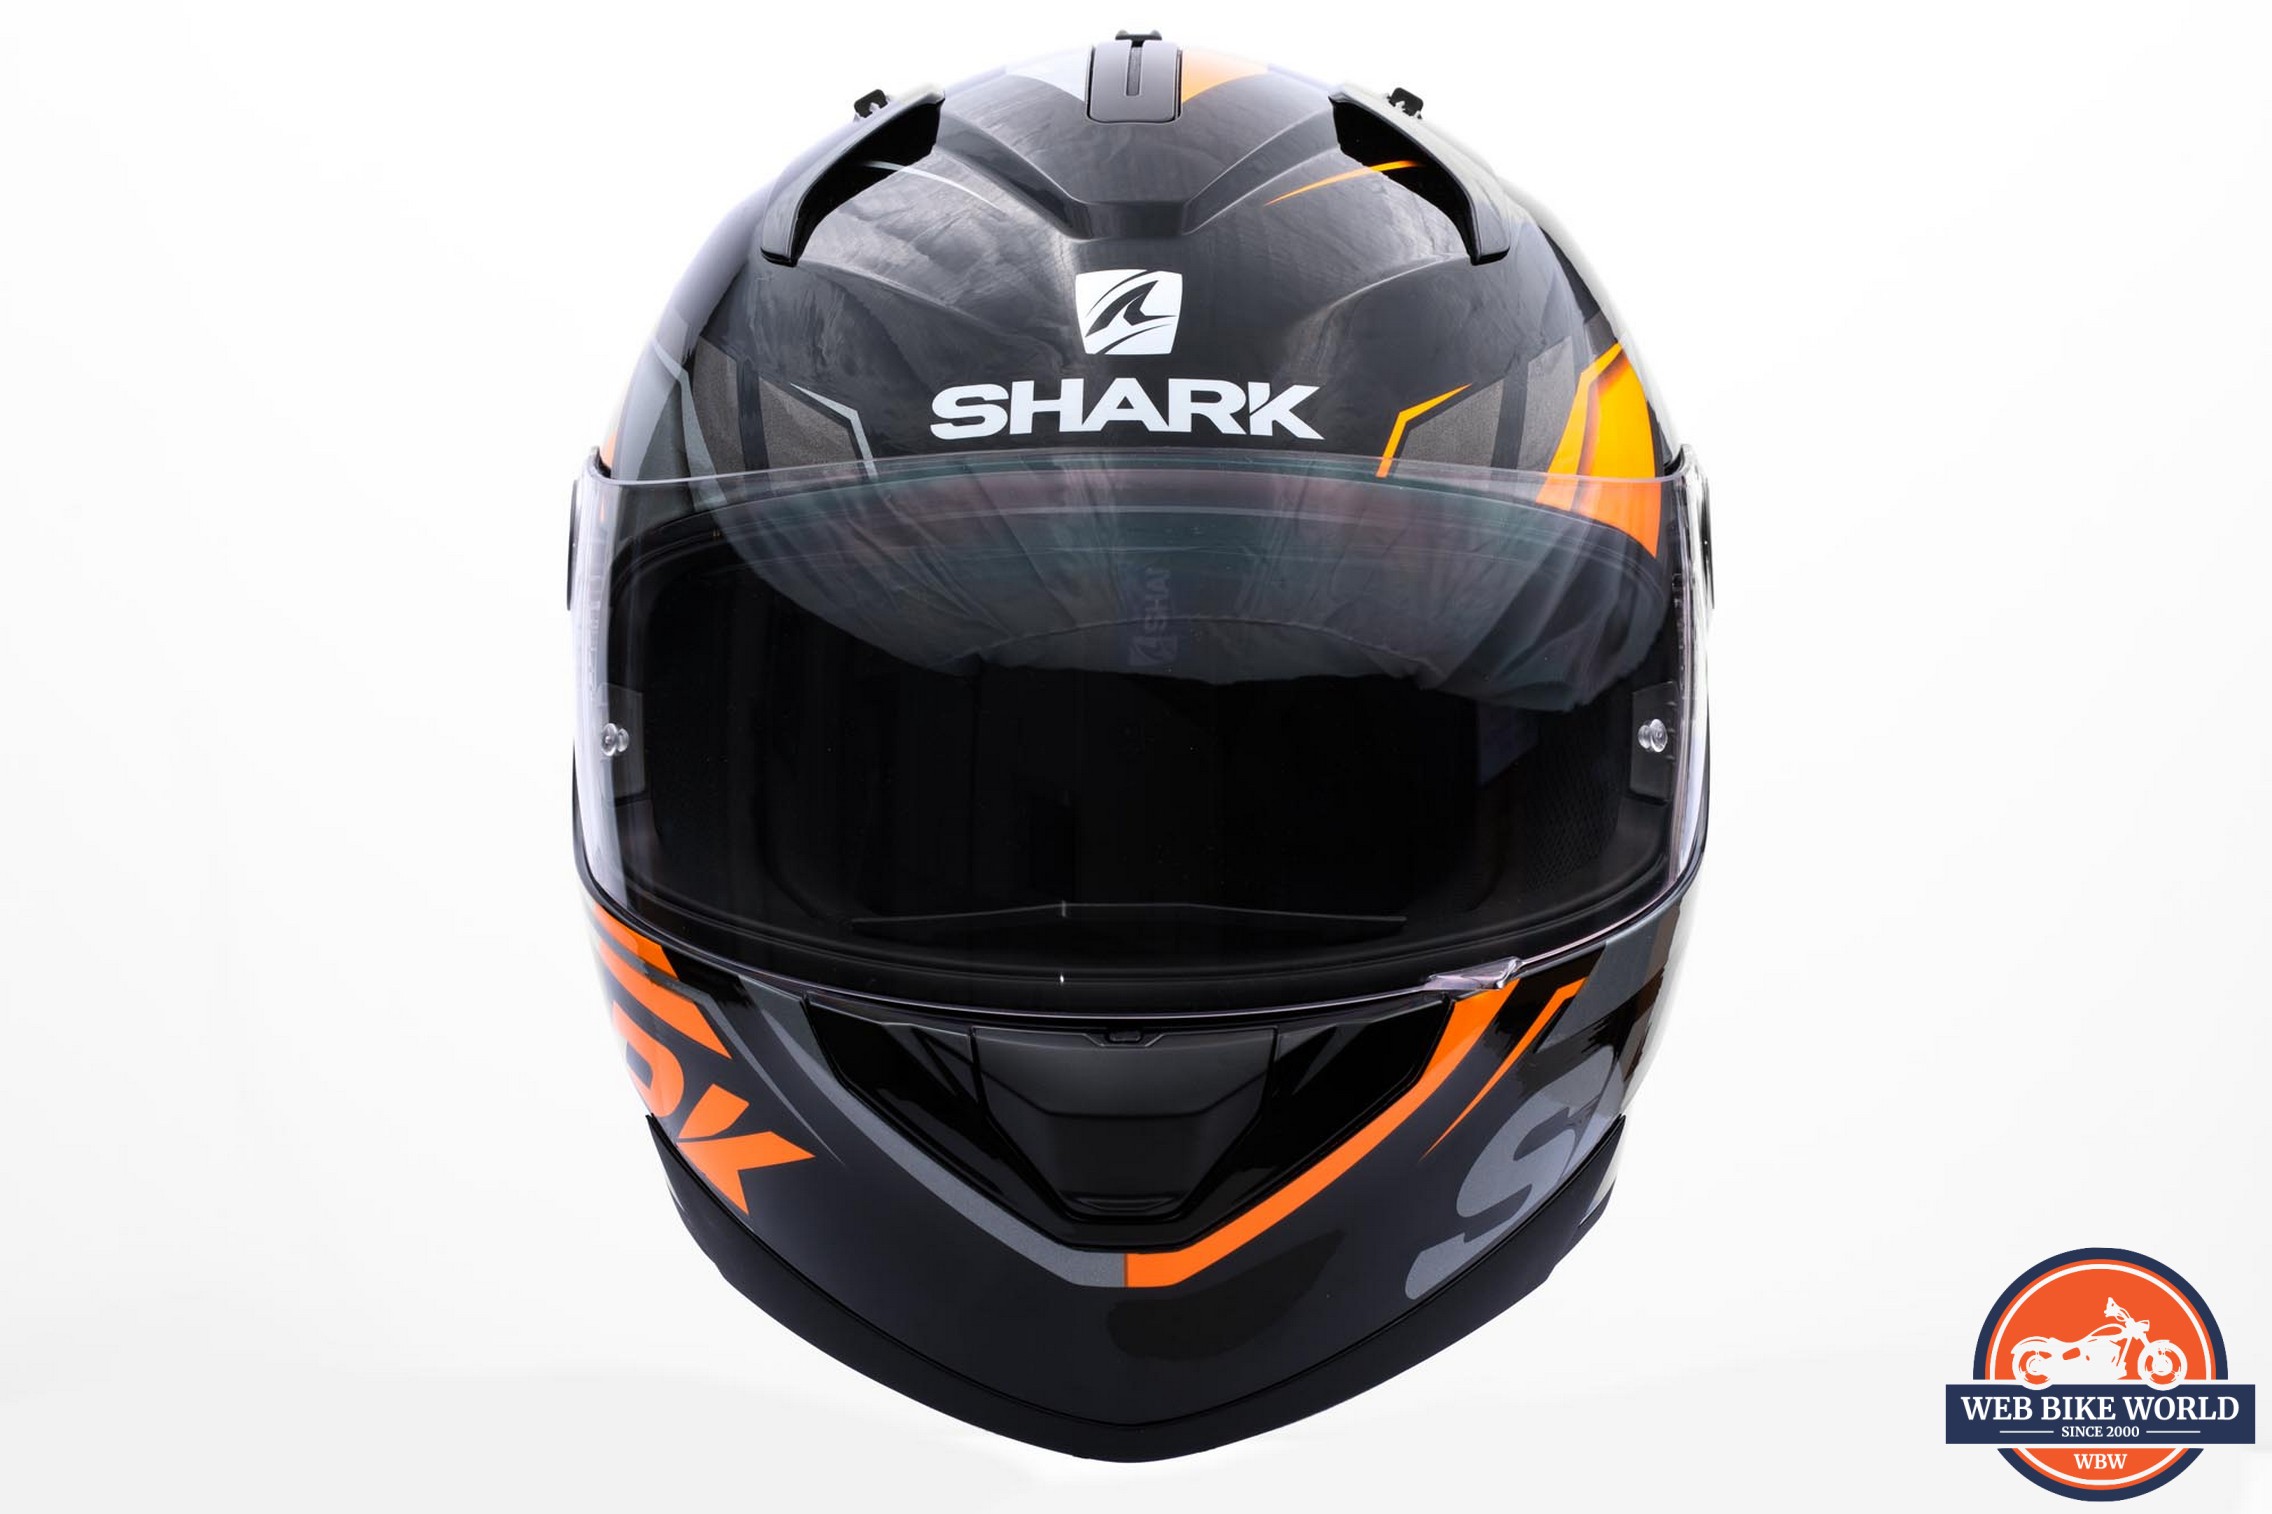 Front view of the Shark Ridill 1.2 helmet
